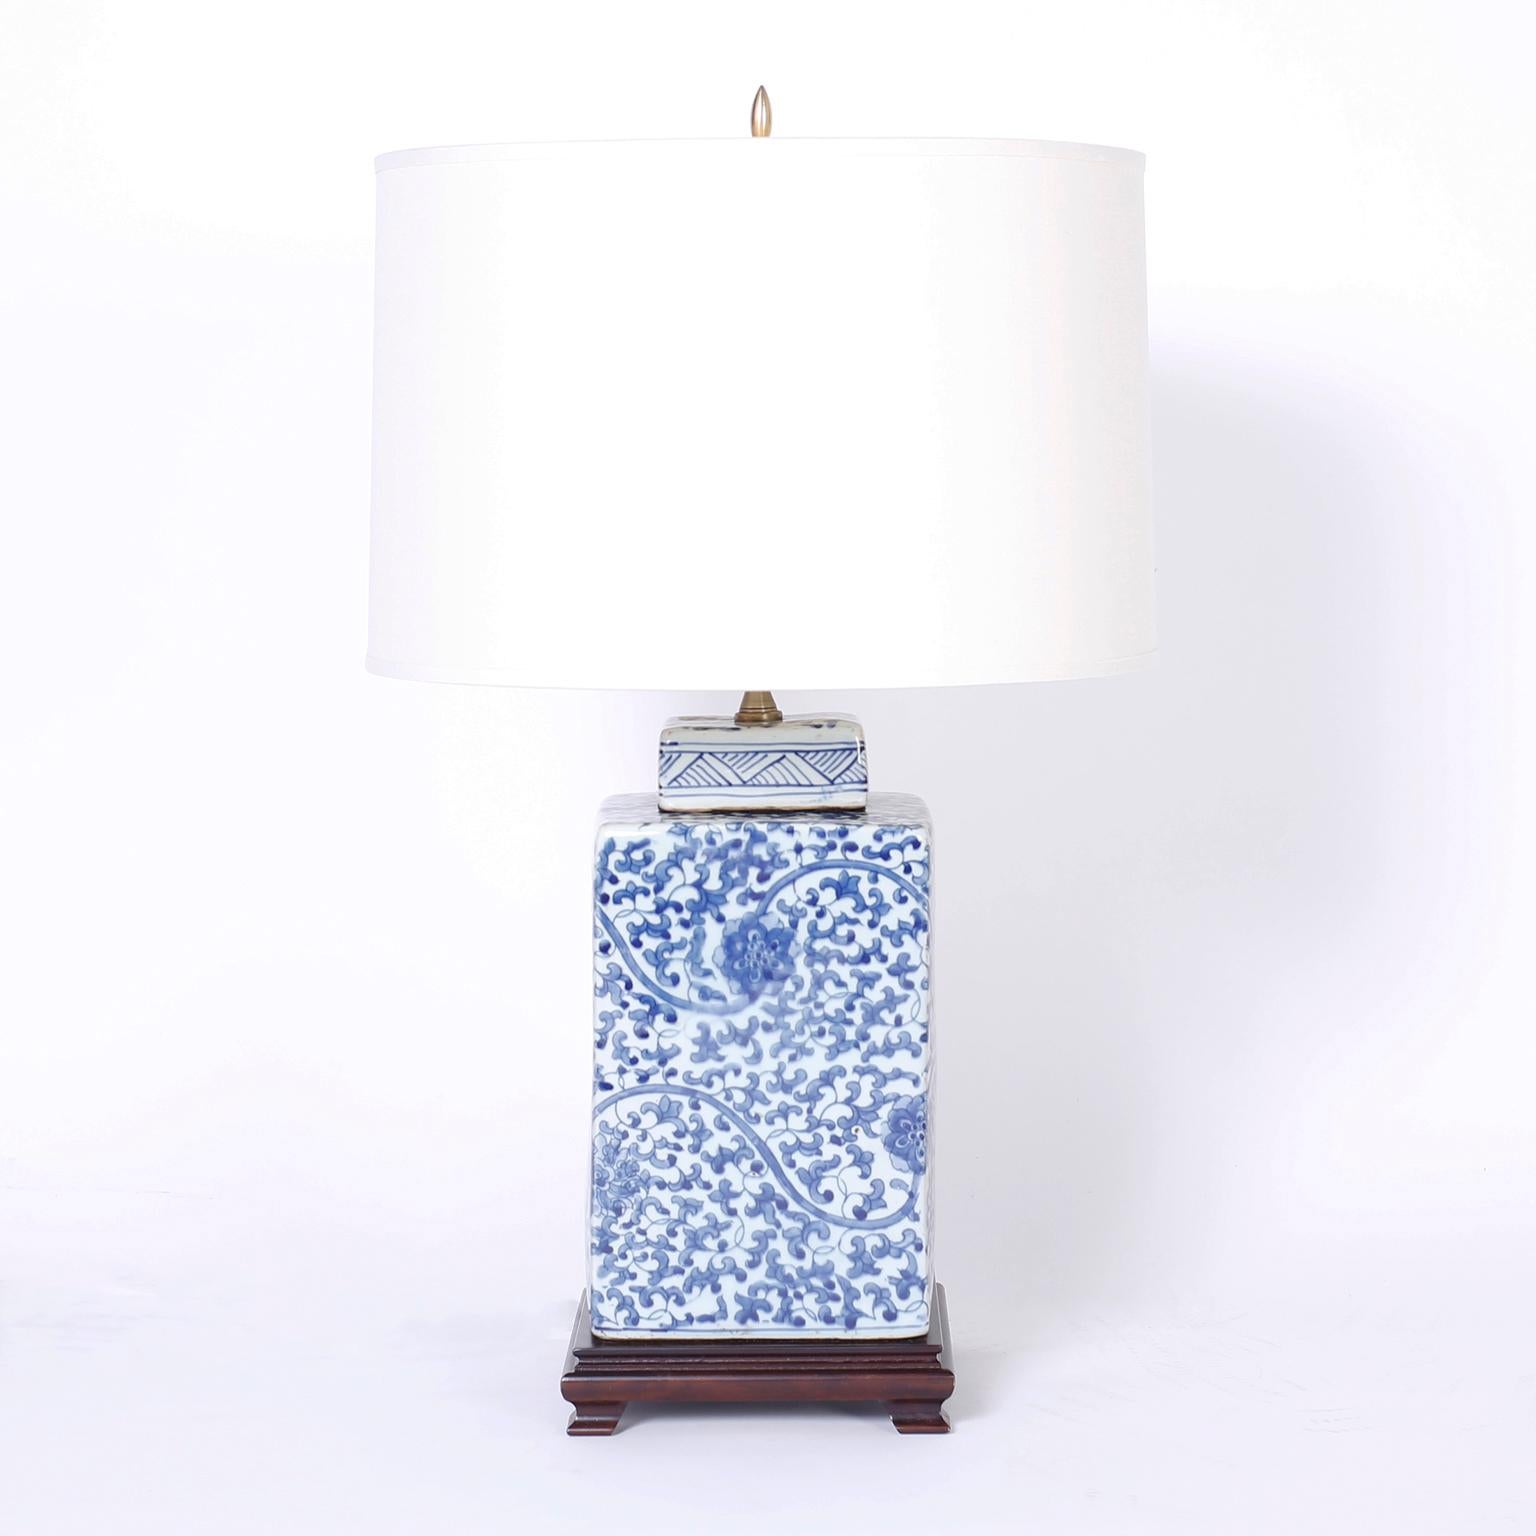 Lofty pair of Chinese porcelain table lamps with a square ginger jar form and decorated in lush floral designs and presented on mahogany bases.